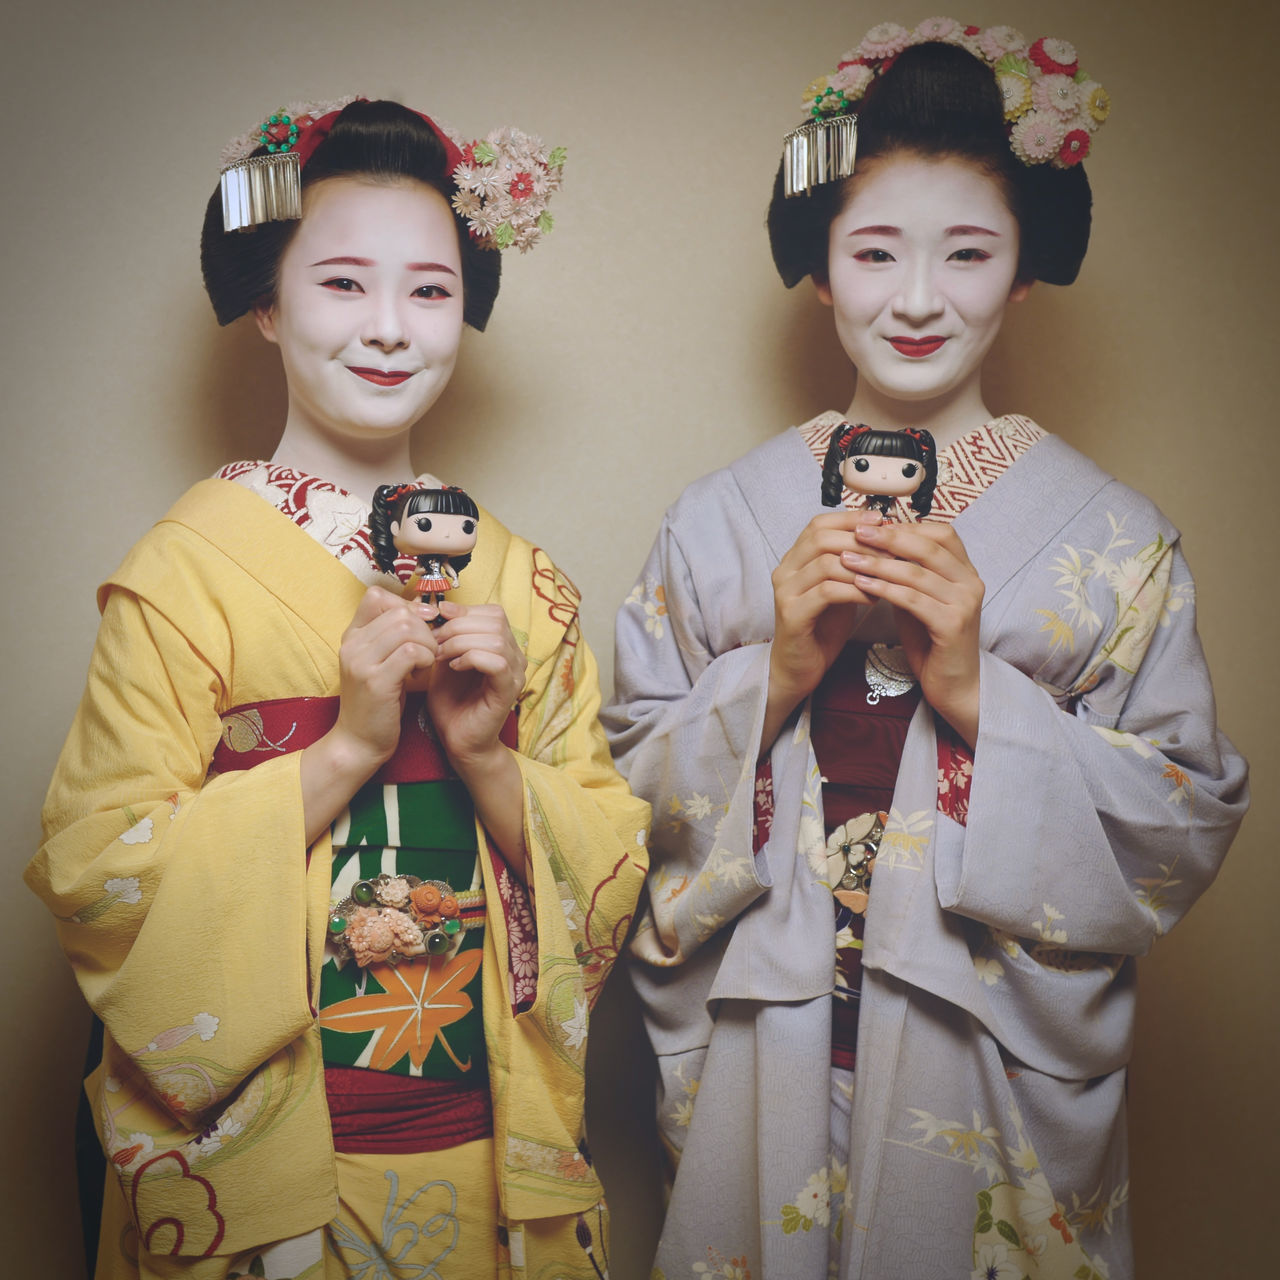 culture, female, two people, portrait, women, clothing, adult, indoors, kimono, studio shot, person, smiling, holding, togetherness, traditional clothing, looking at camera, costume, child, young adult, waist up, childhood, robe, emotion, front view, happiness, standing, men, celebration, friendship, flower, fashion accessory